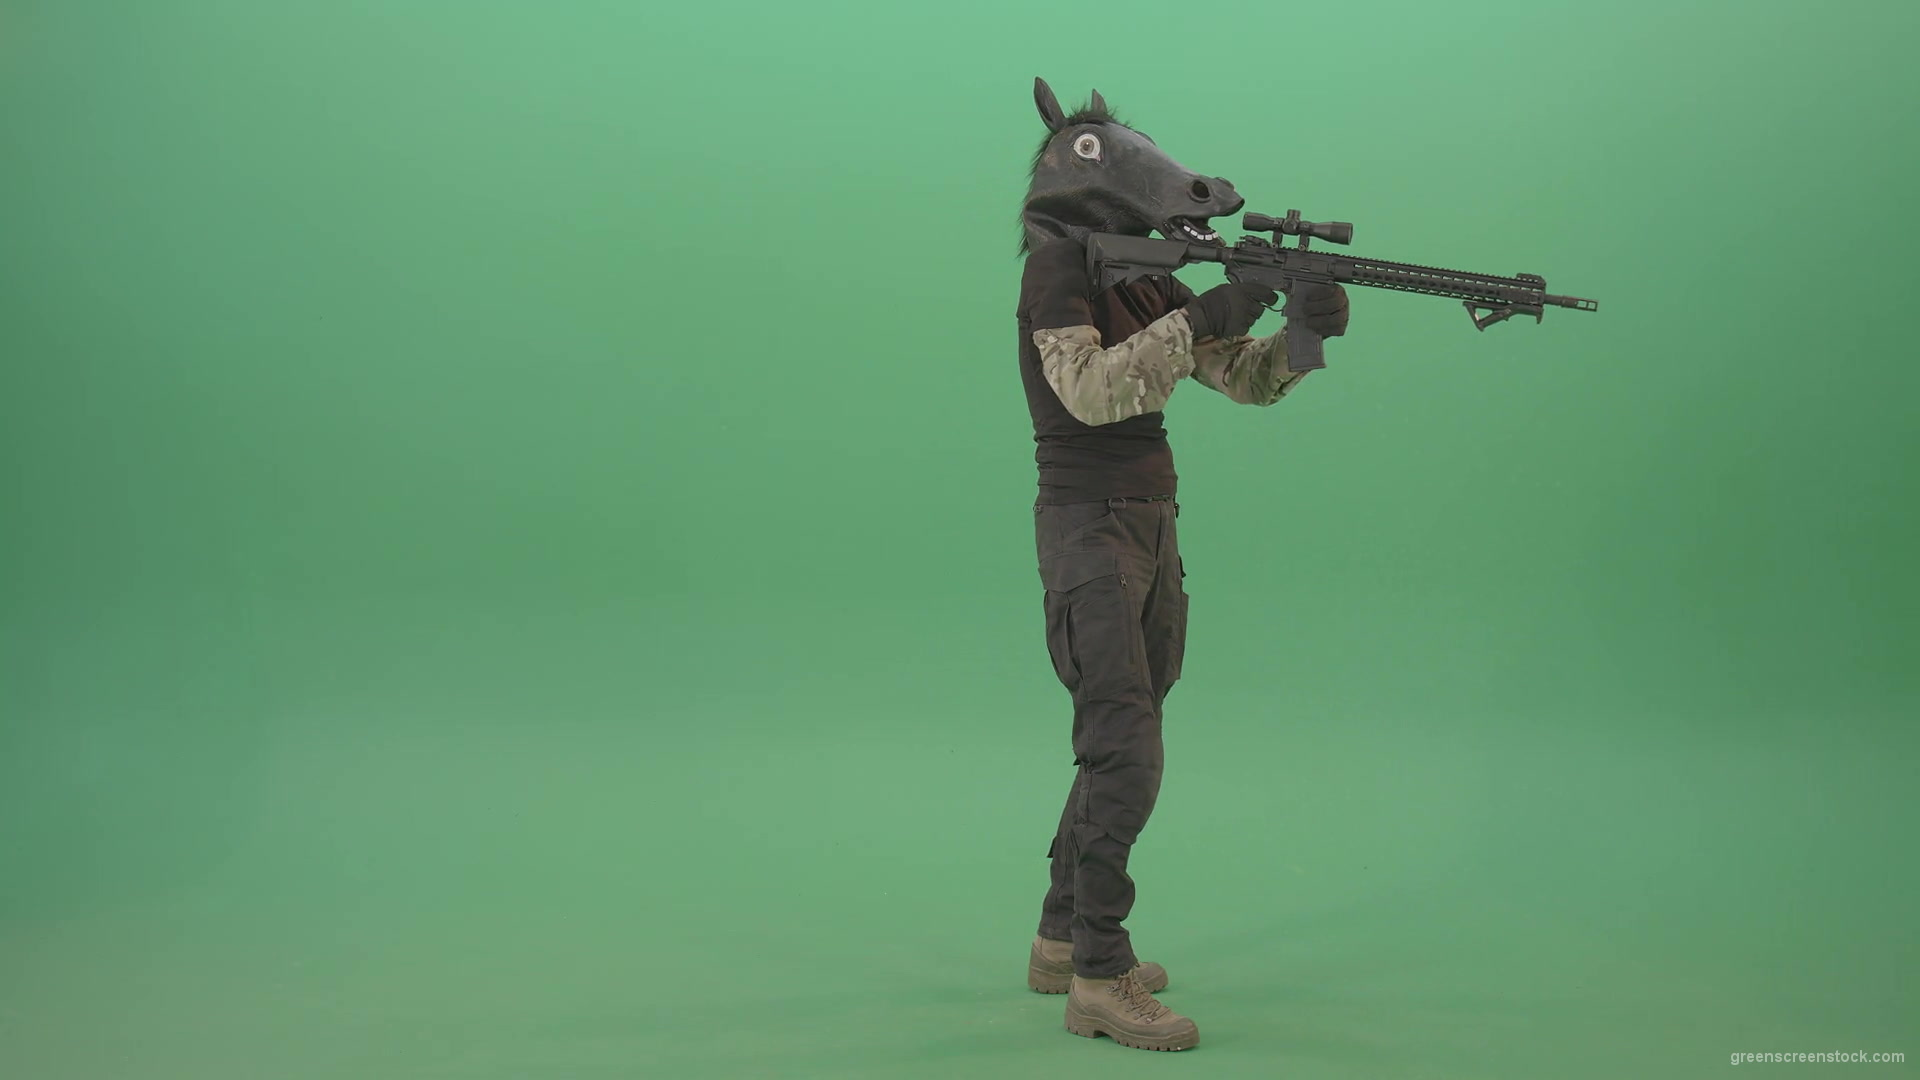 Funny-Army-Horse-Man-shooting-animals-on-Green-Screen-from-Machine-Gun-4K-Video-Footage-1920_008 Green Screen Stock